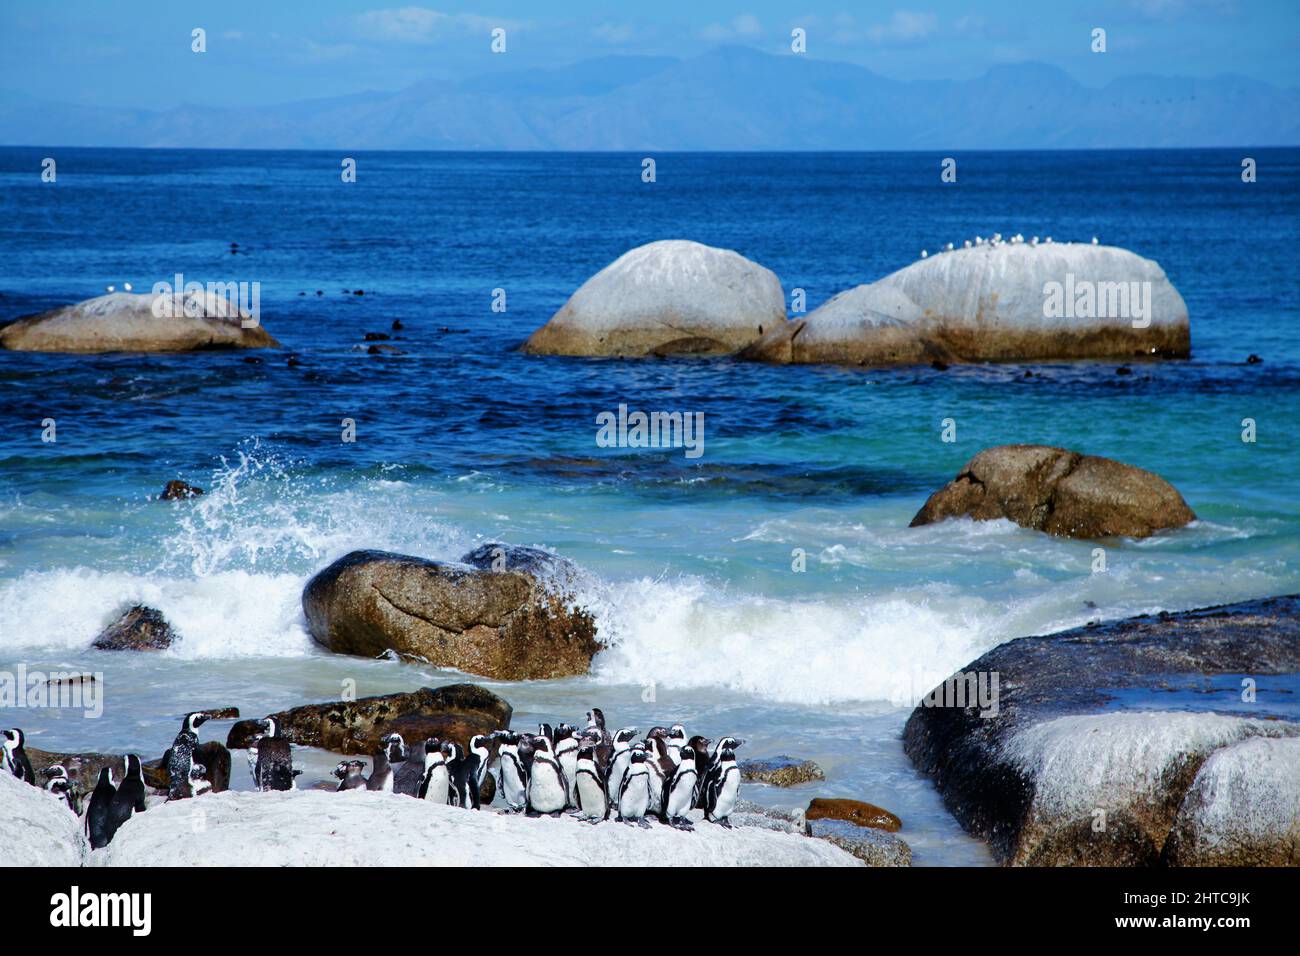 African Penguins Cape Nature living at Boulders Beach near Simon's Town on South Africa's Western Cape coastline Stock Photo